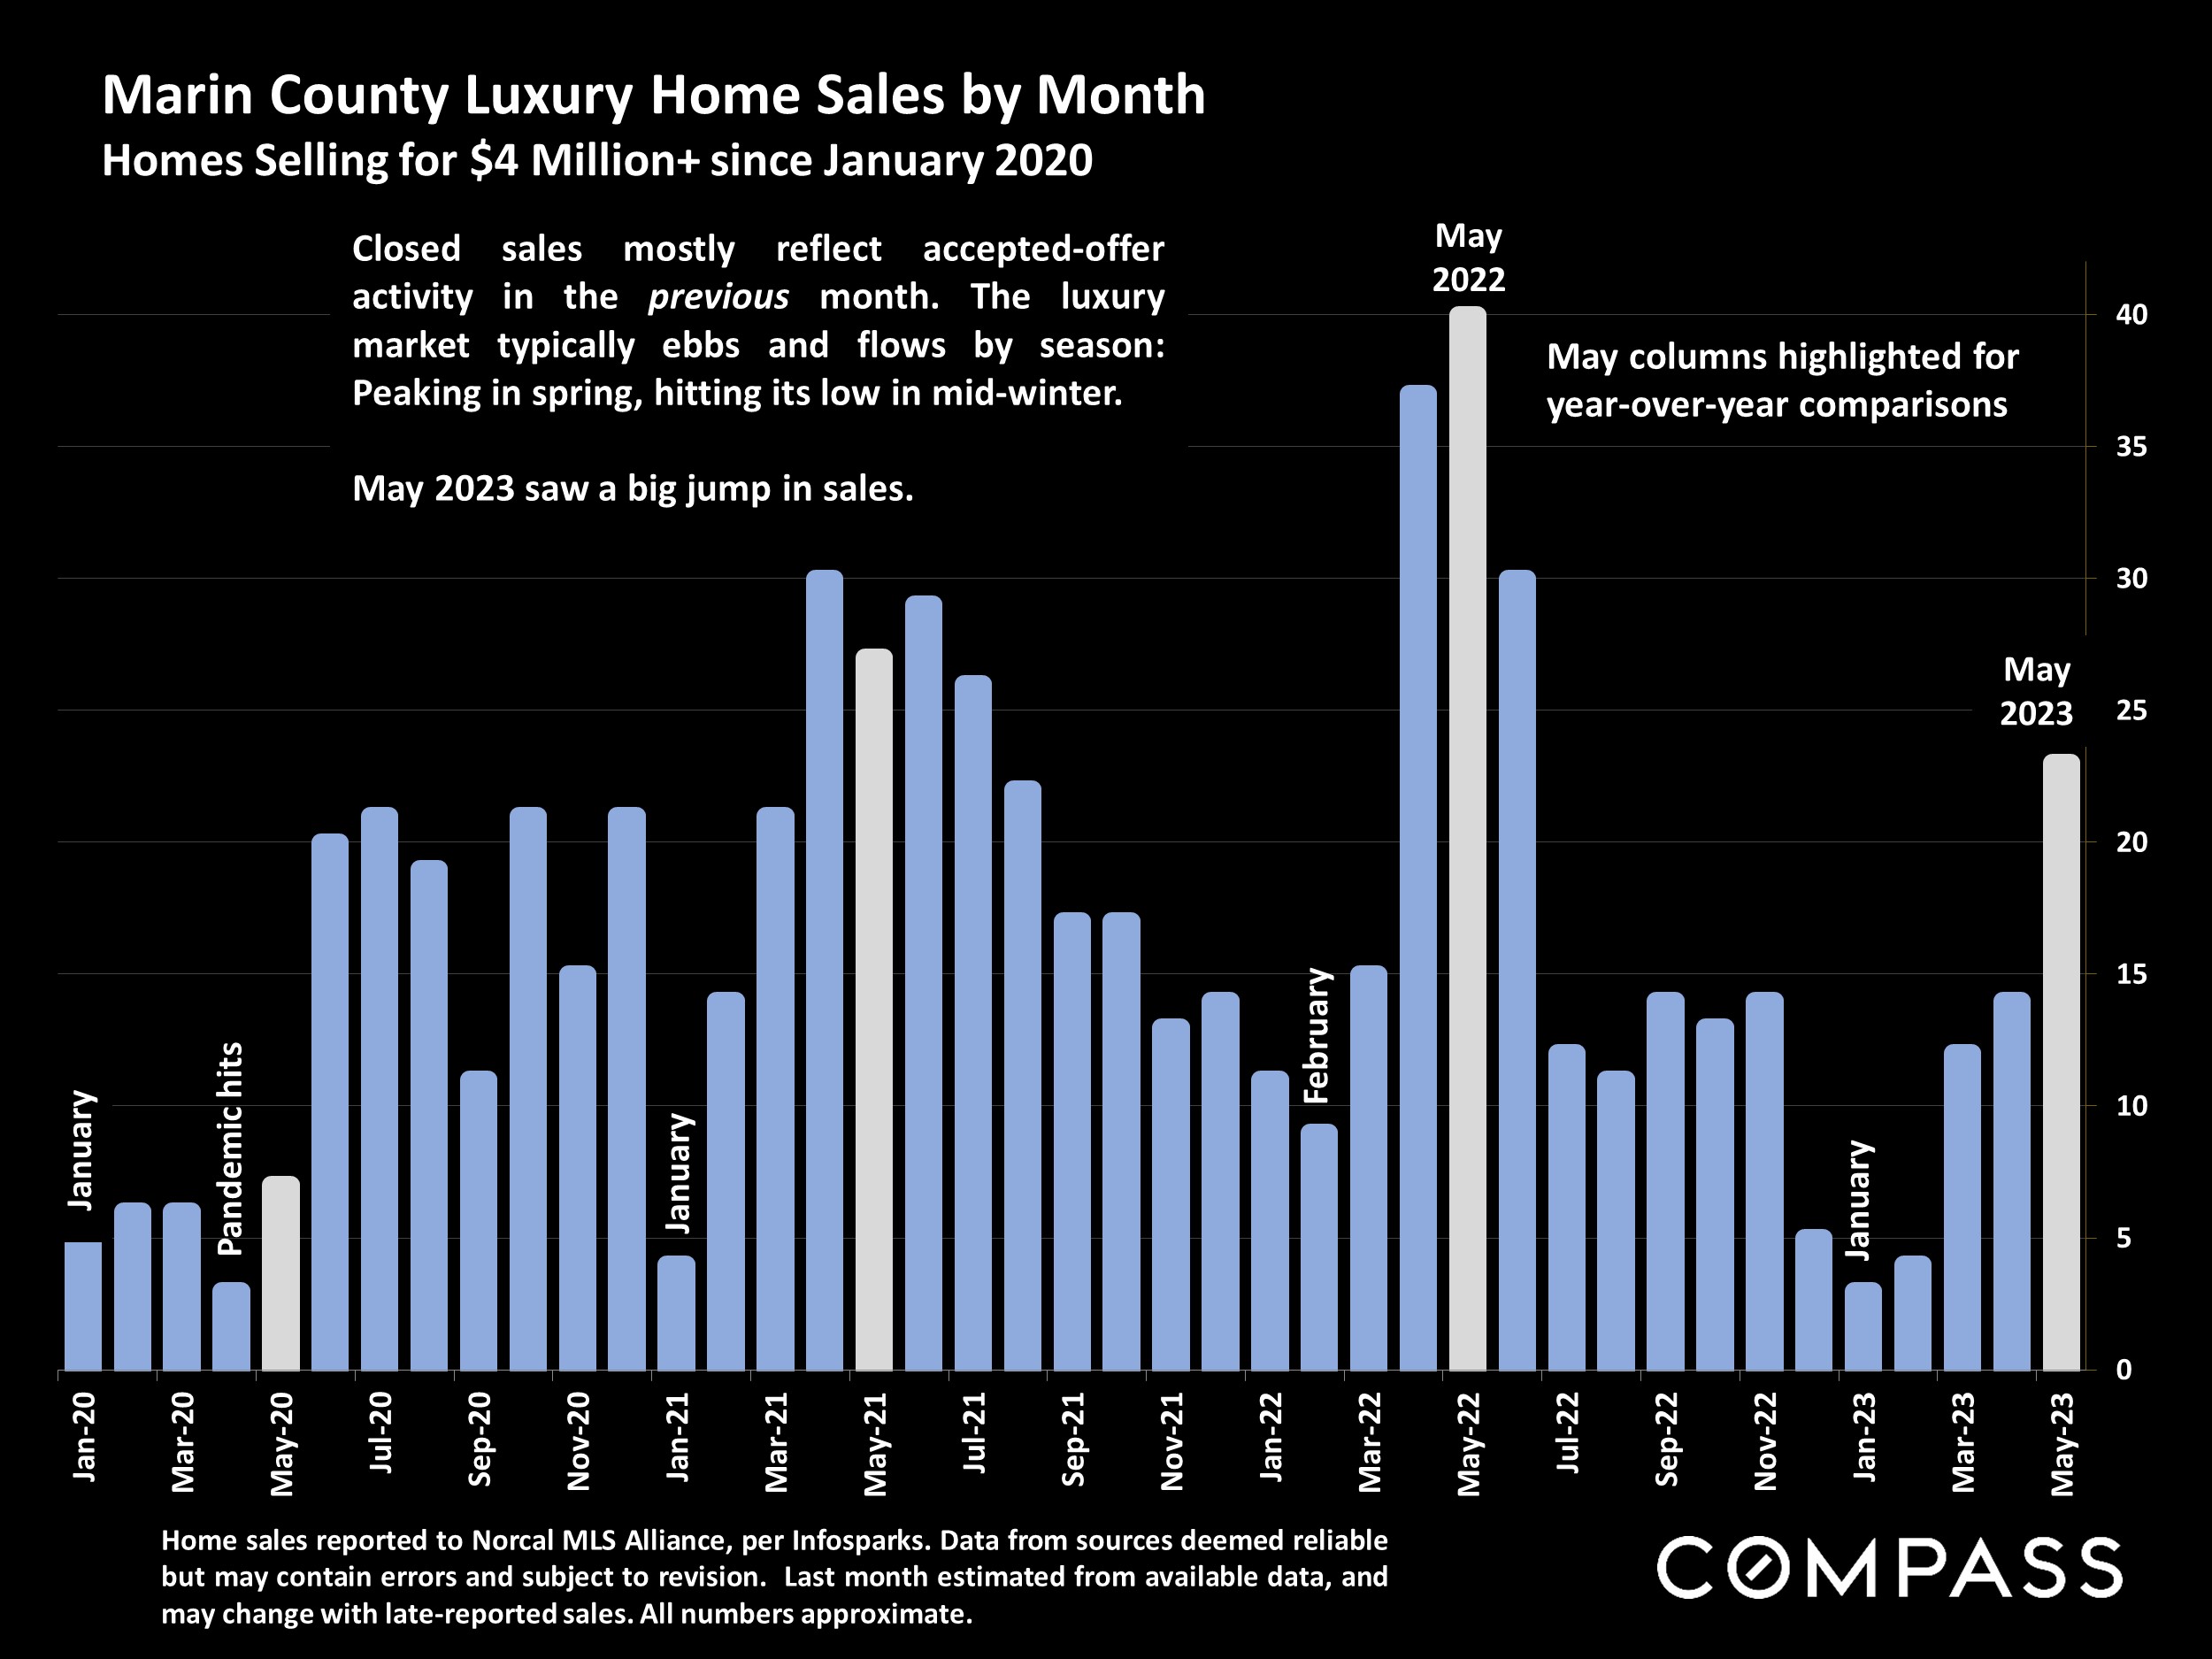 Marin County Luxury Home Sales by Month